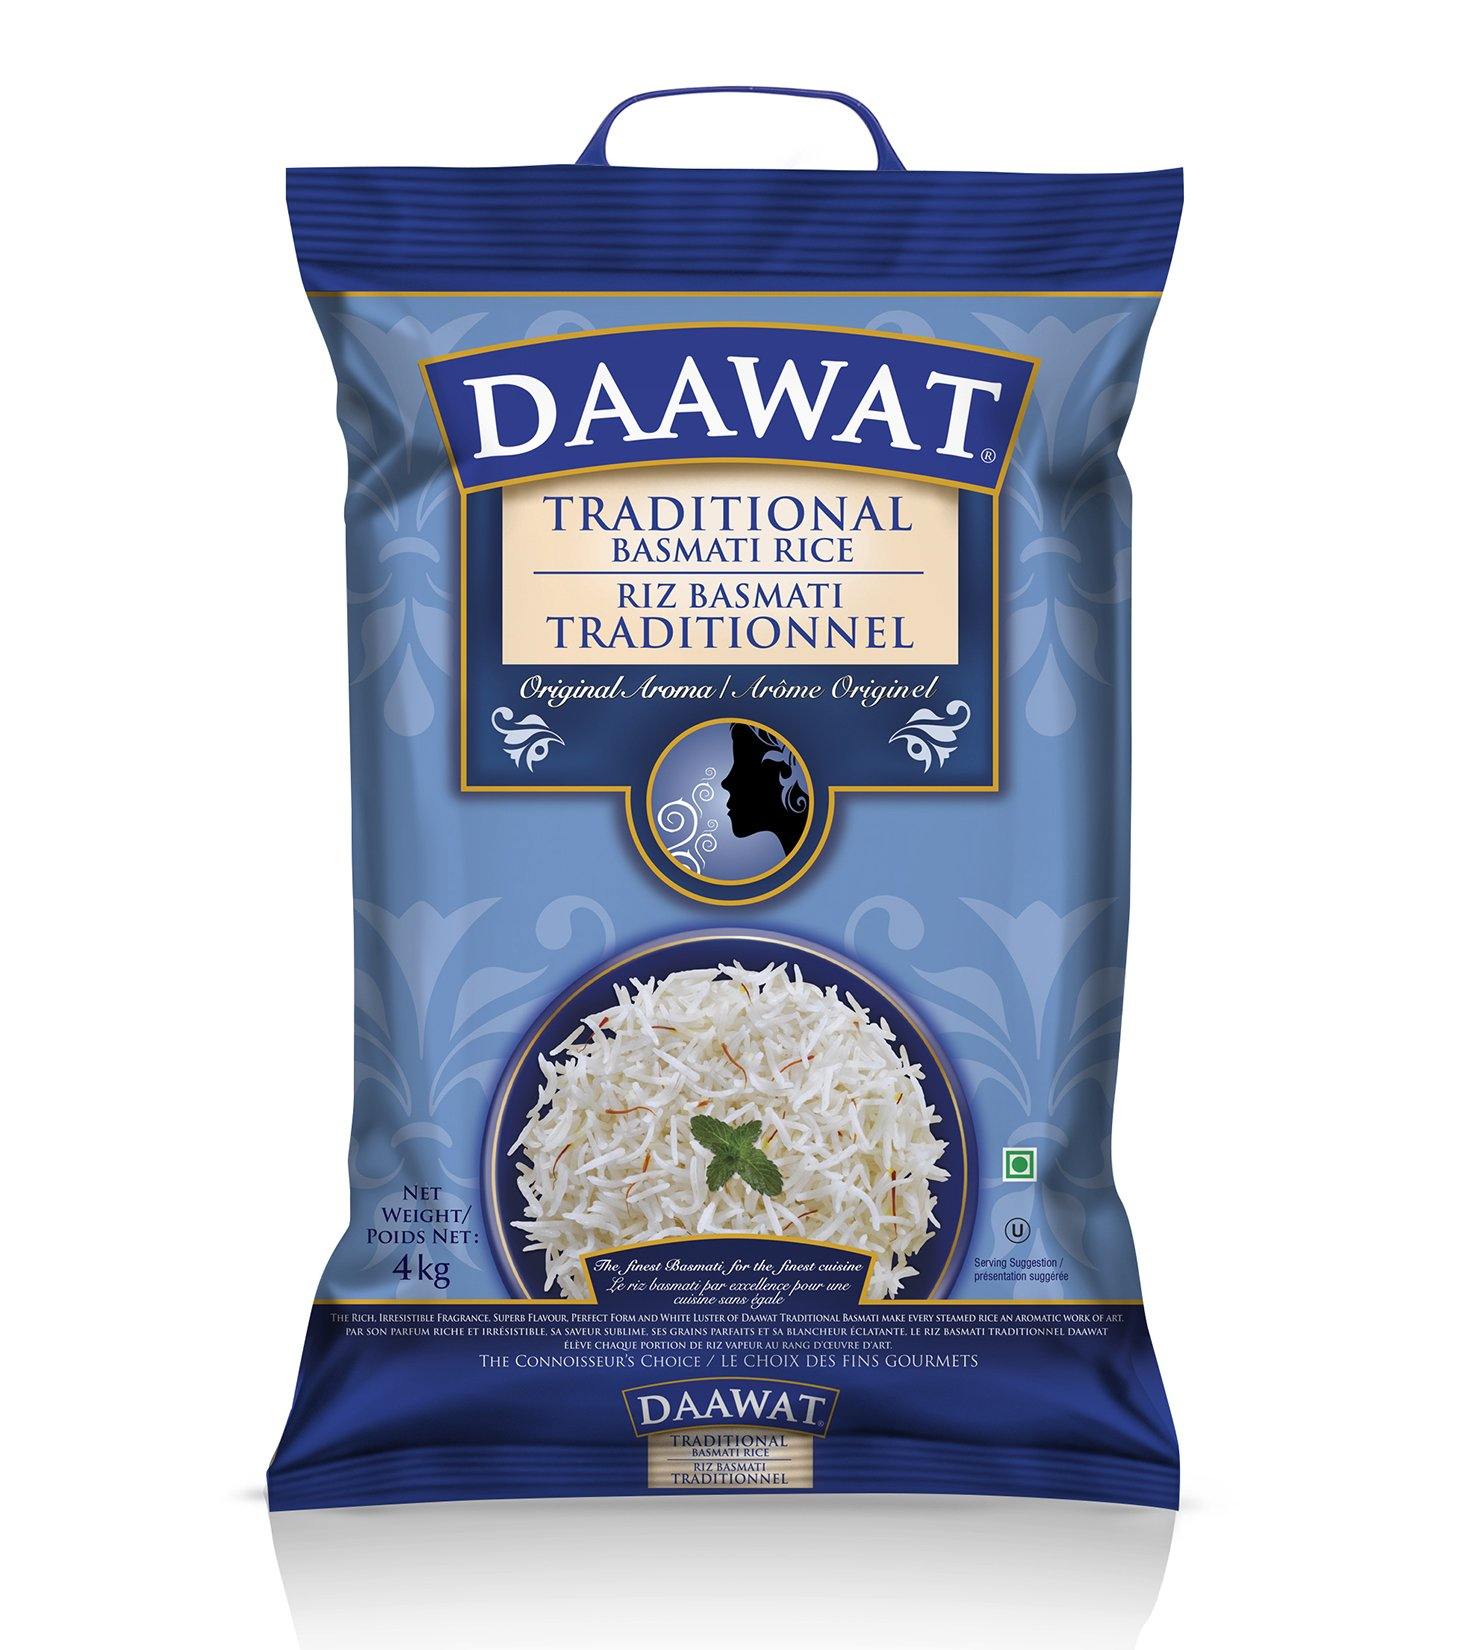 Daawat Basmati Rice 4kg - Cartly - Indian Grocery Store